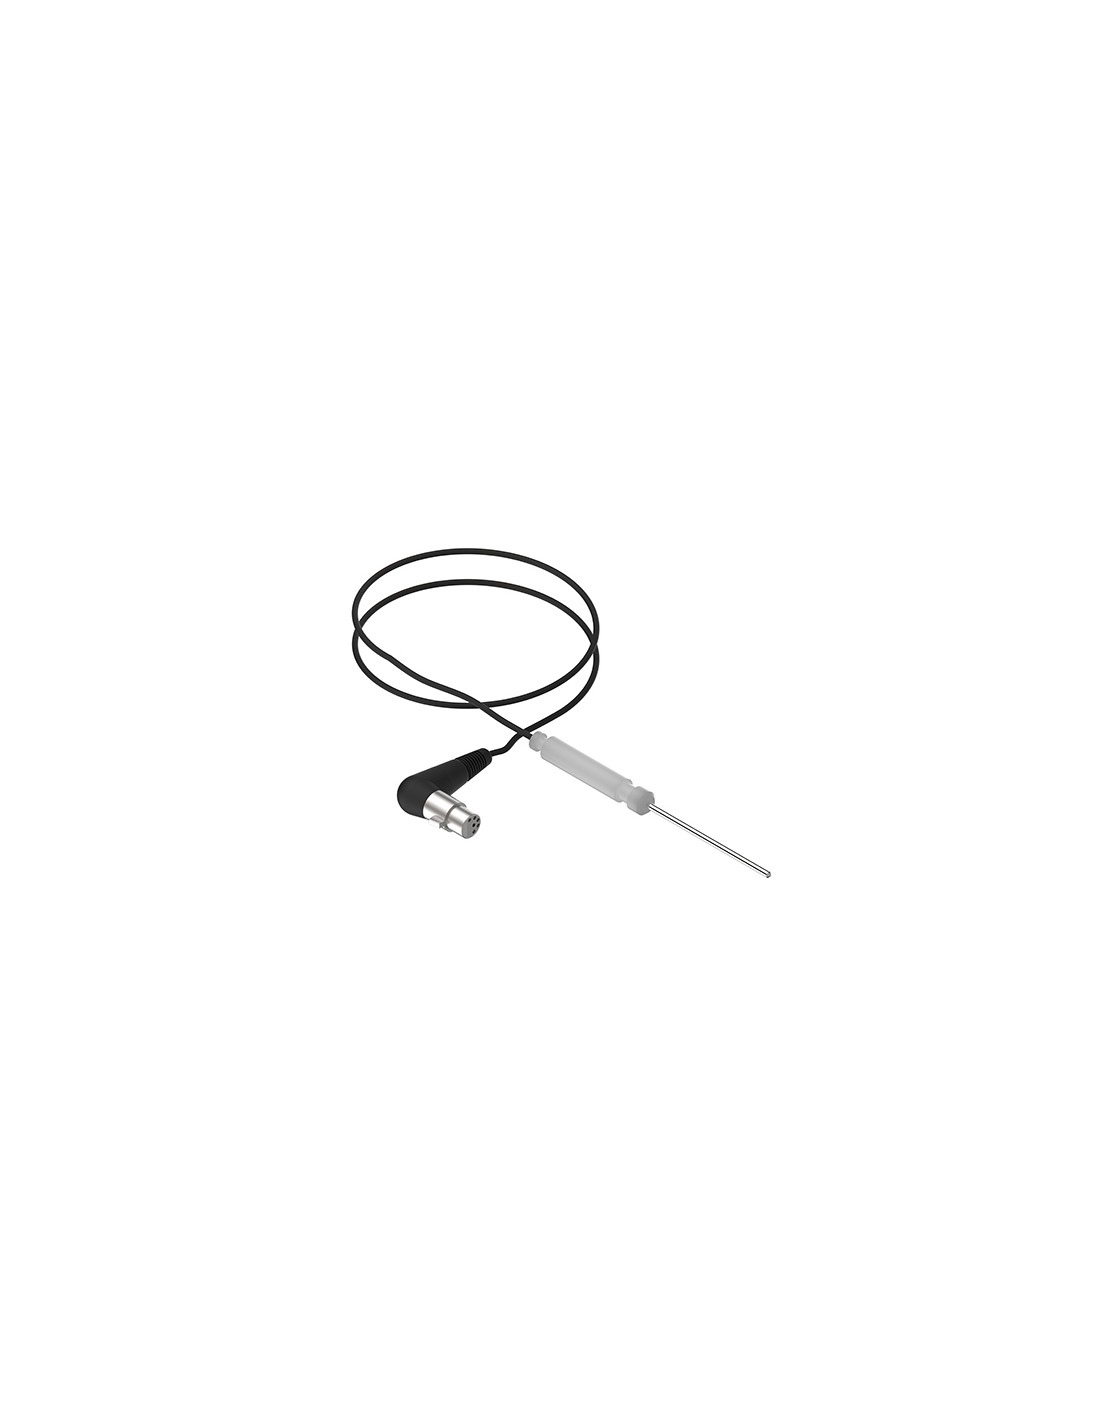 3-point multipoint heart probe